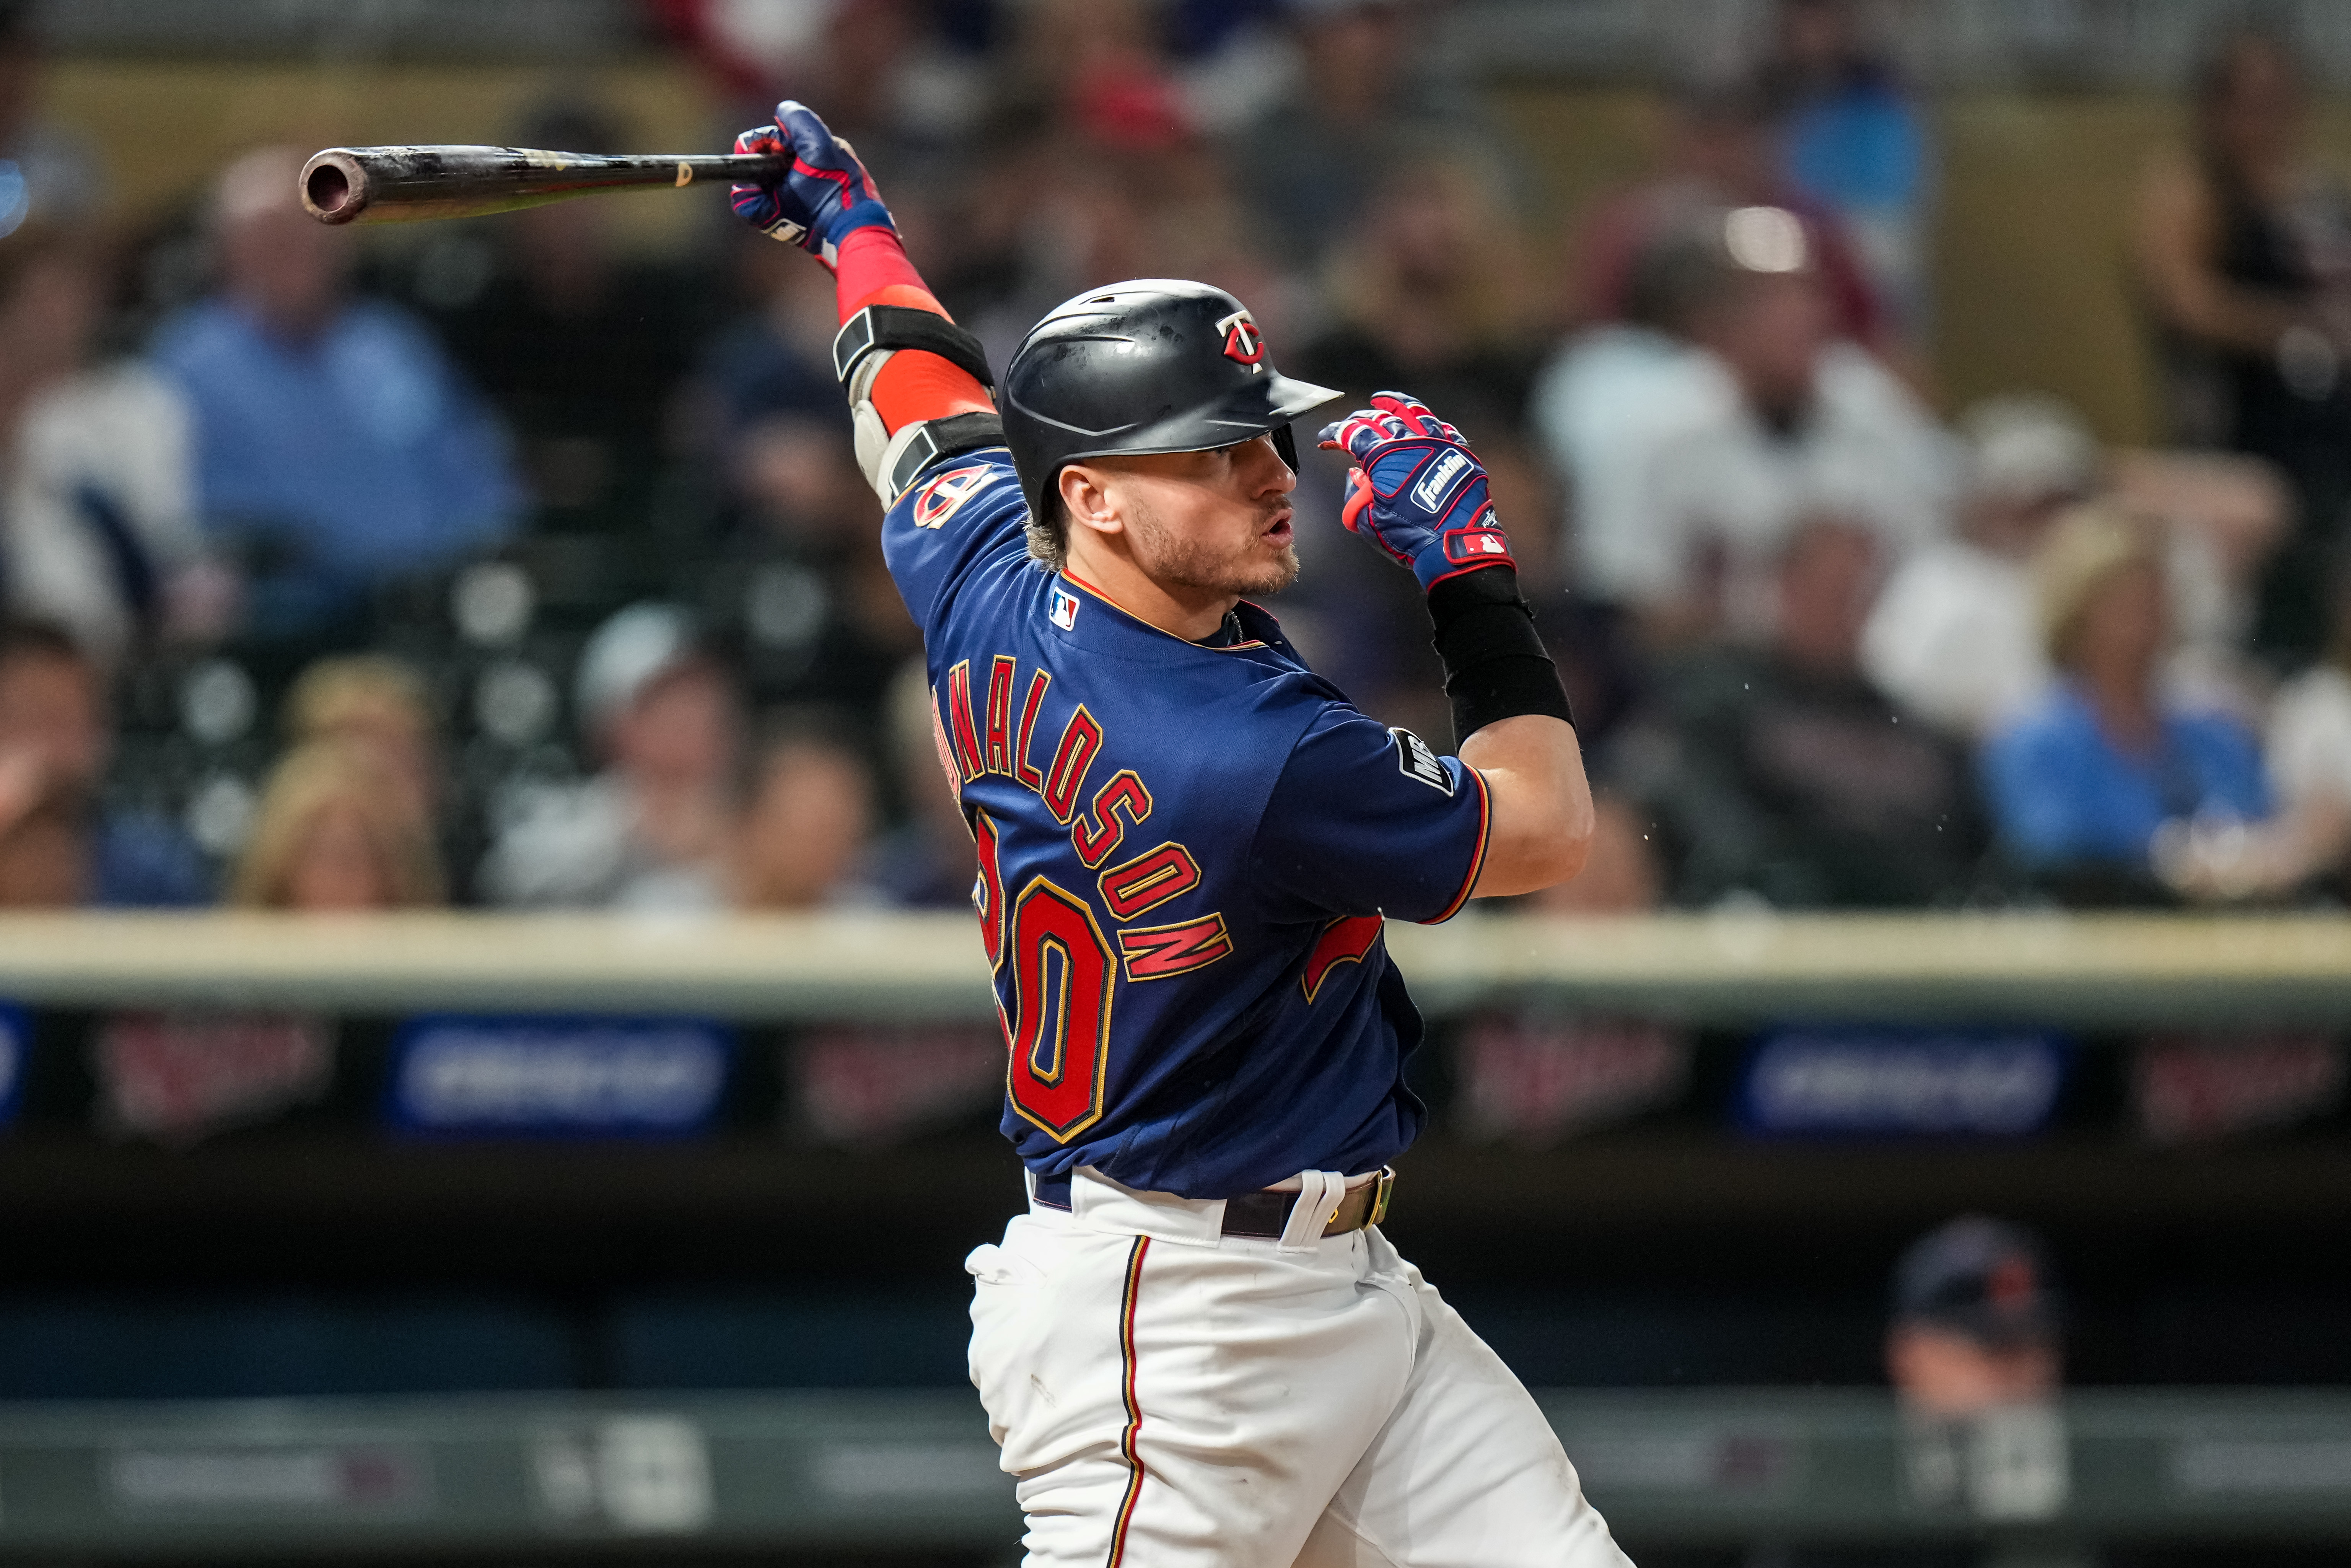 Josh Donaldson #20 of the Minnesota Twins bats against the Detroit Tigers on September 29, 2021 at Target Field in Minneapolis, Minnesota.